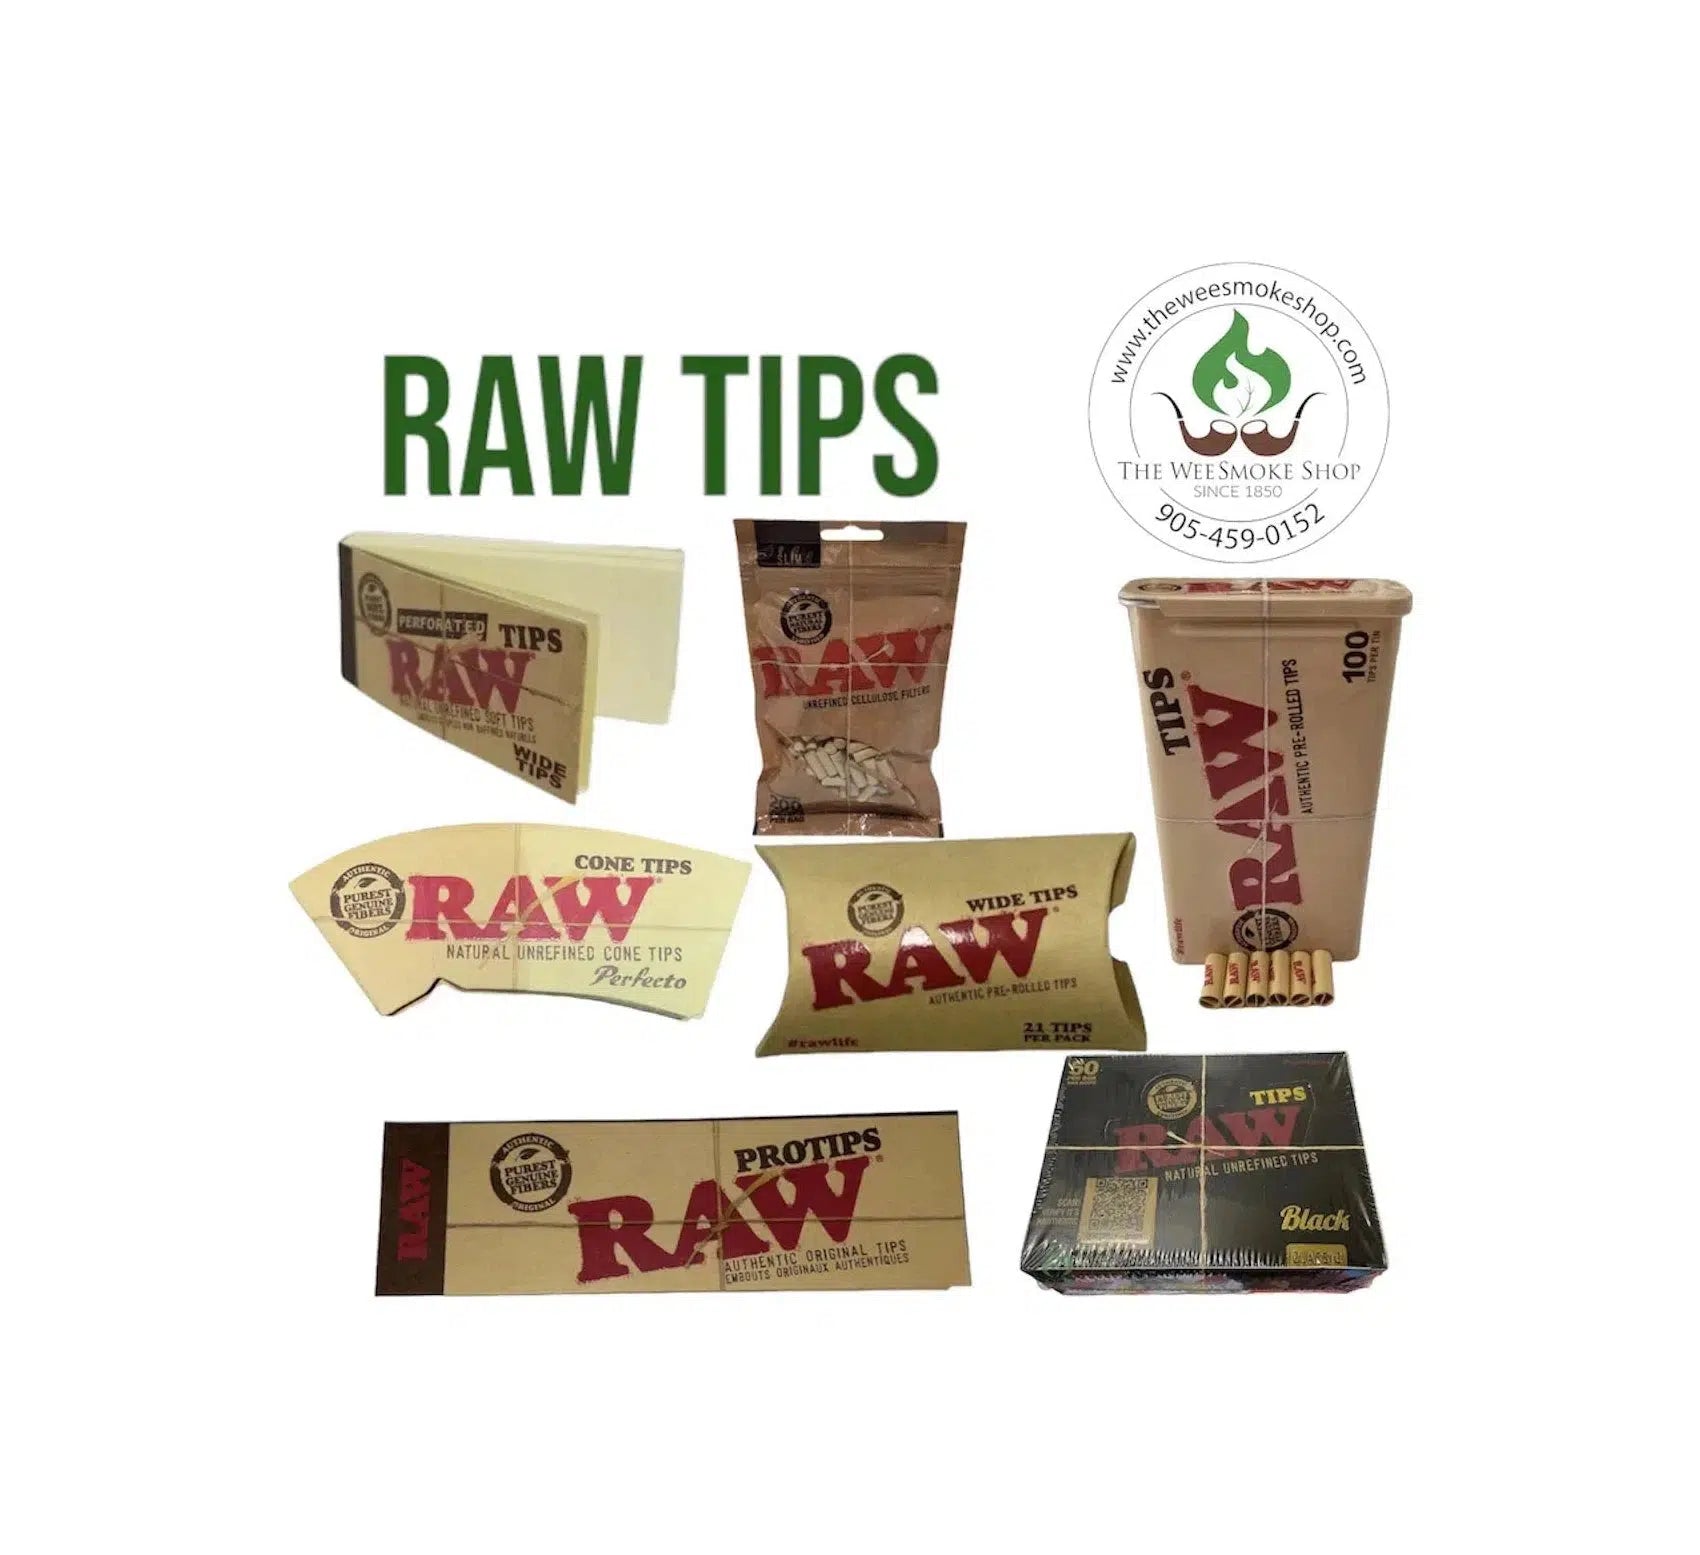 Raw Pre-Rolled Filter Tips - The Drug Store